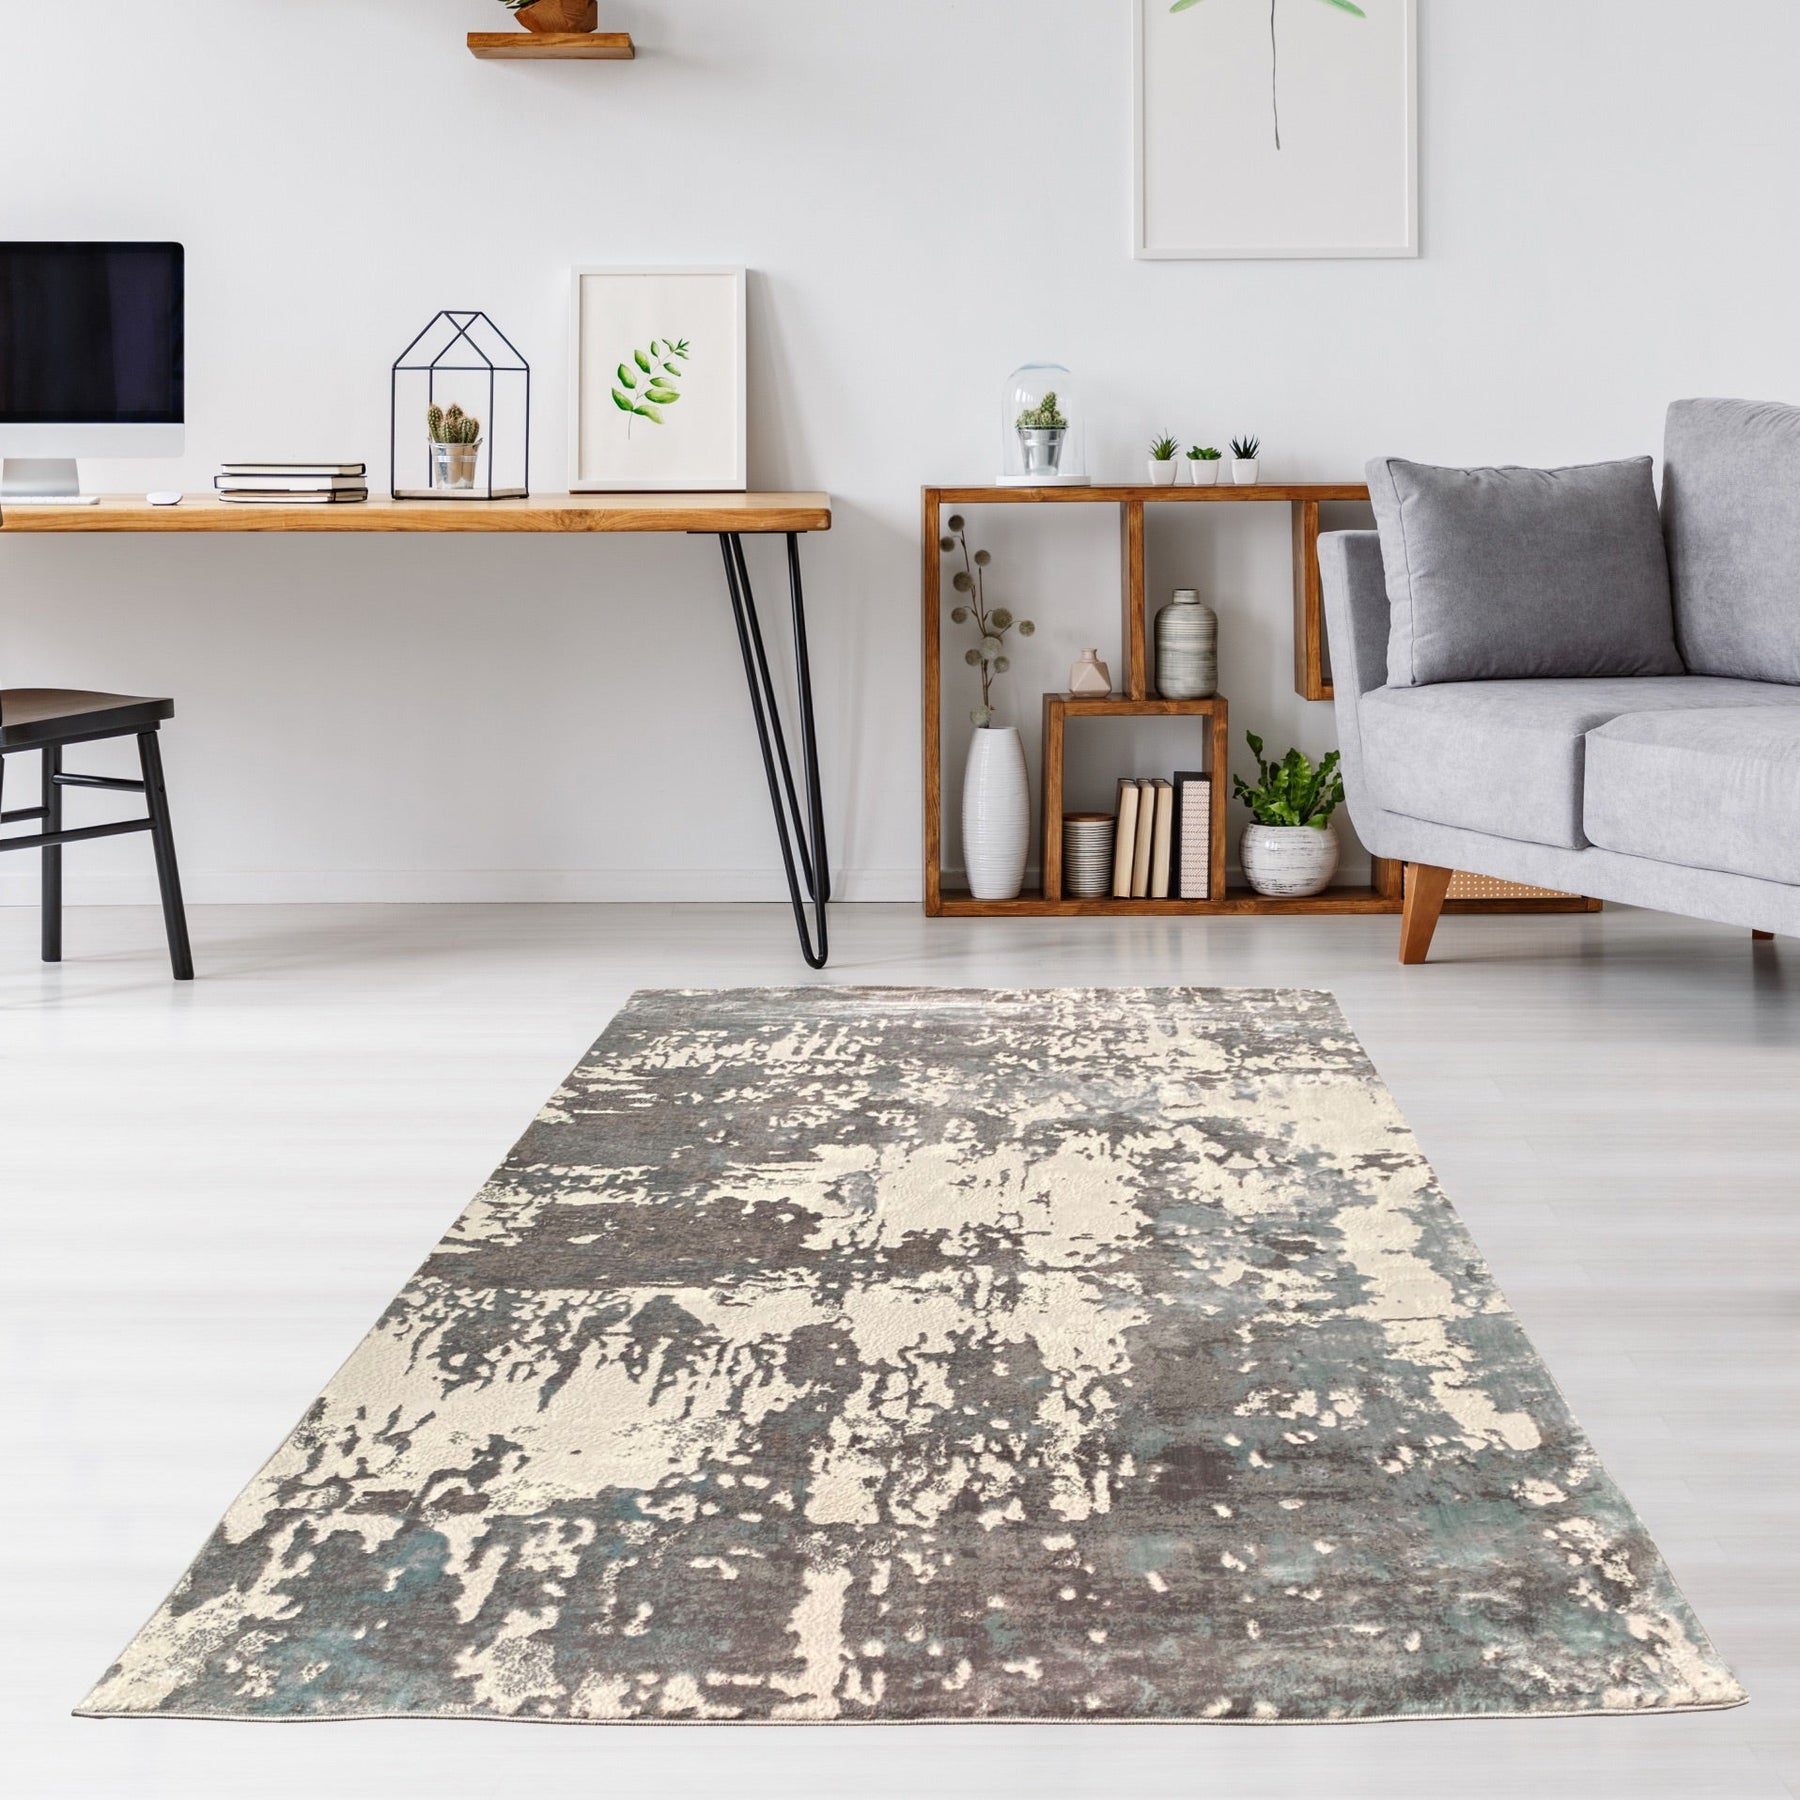 4 Secret Tips To Identify The Best Quality Area Rugs